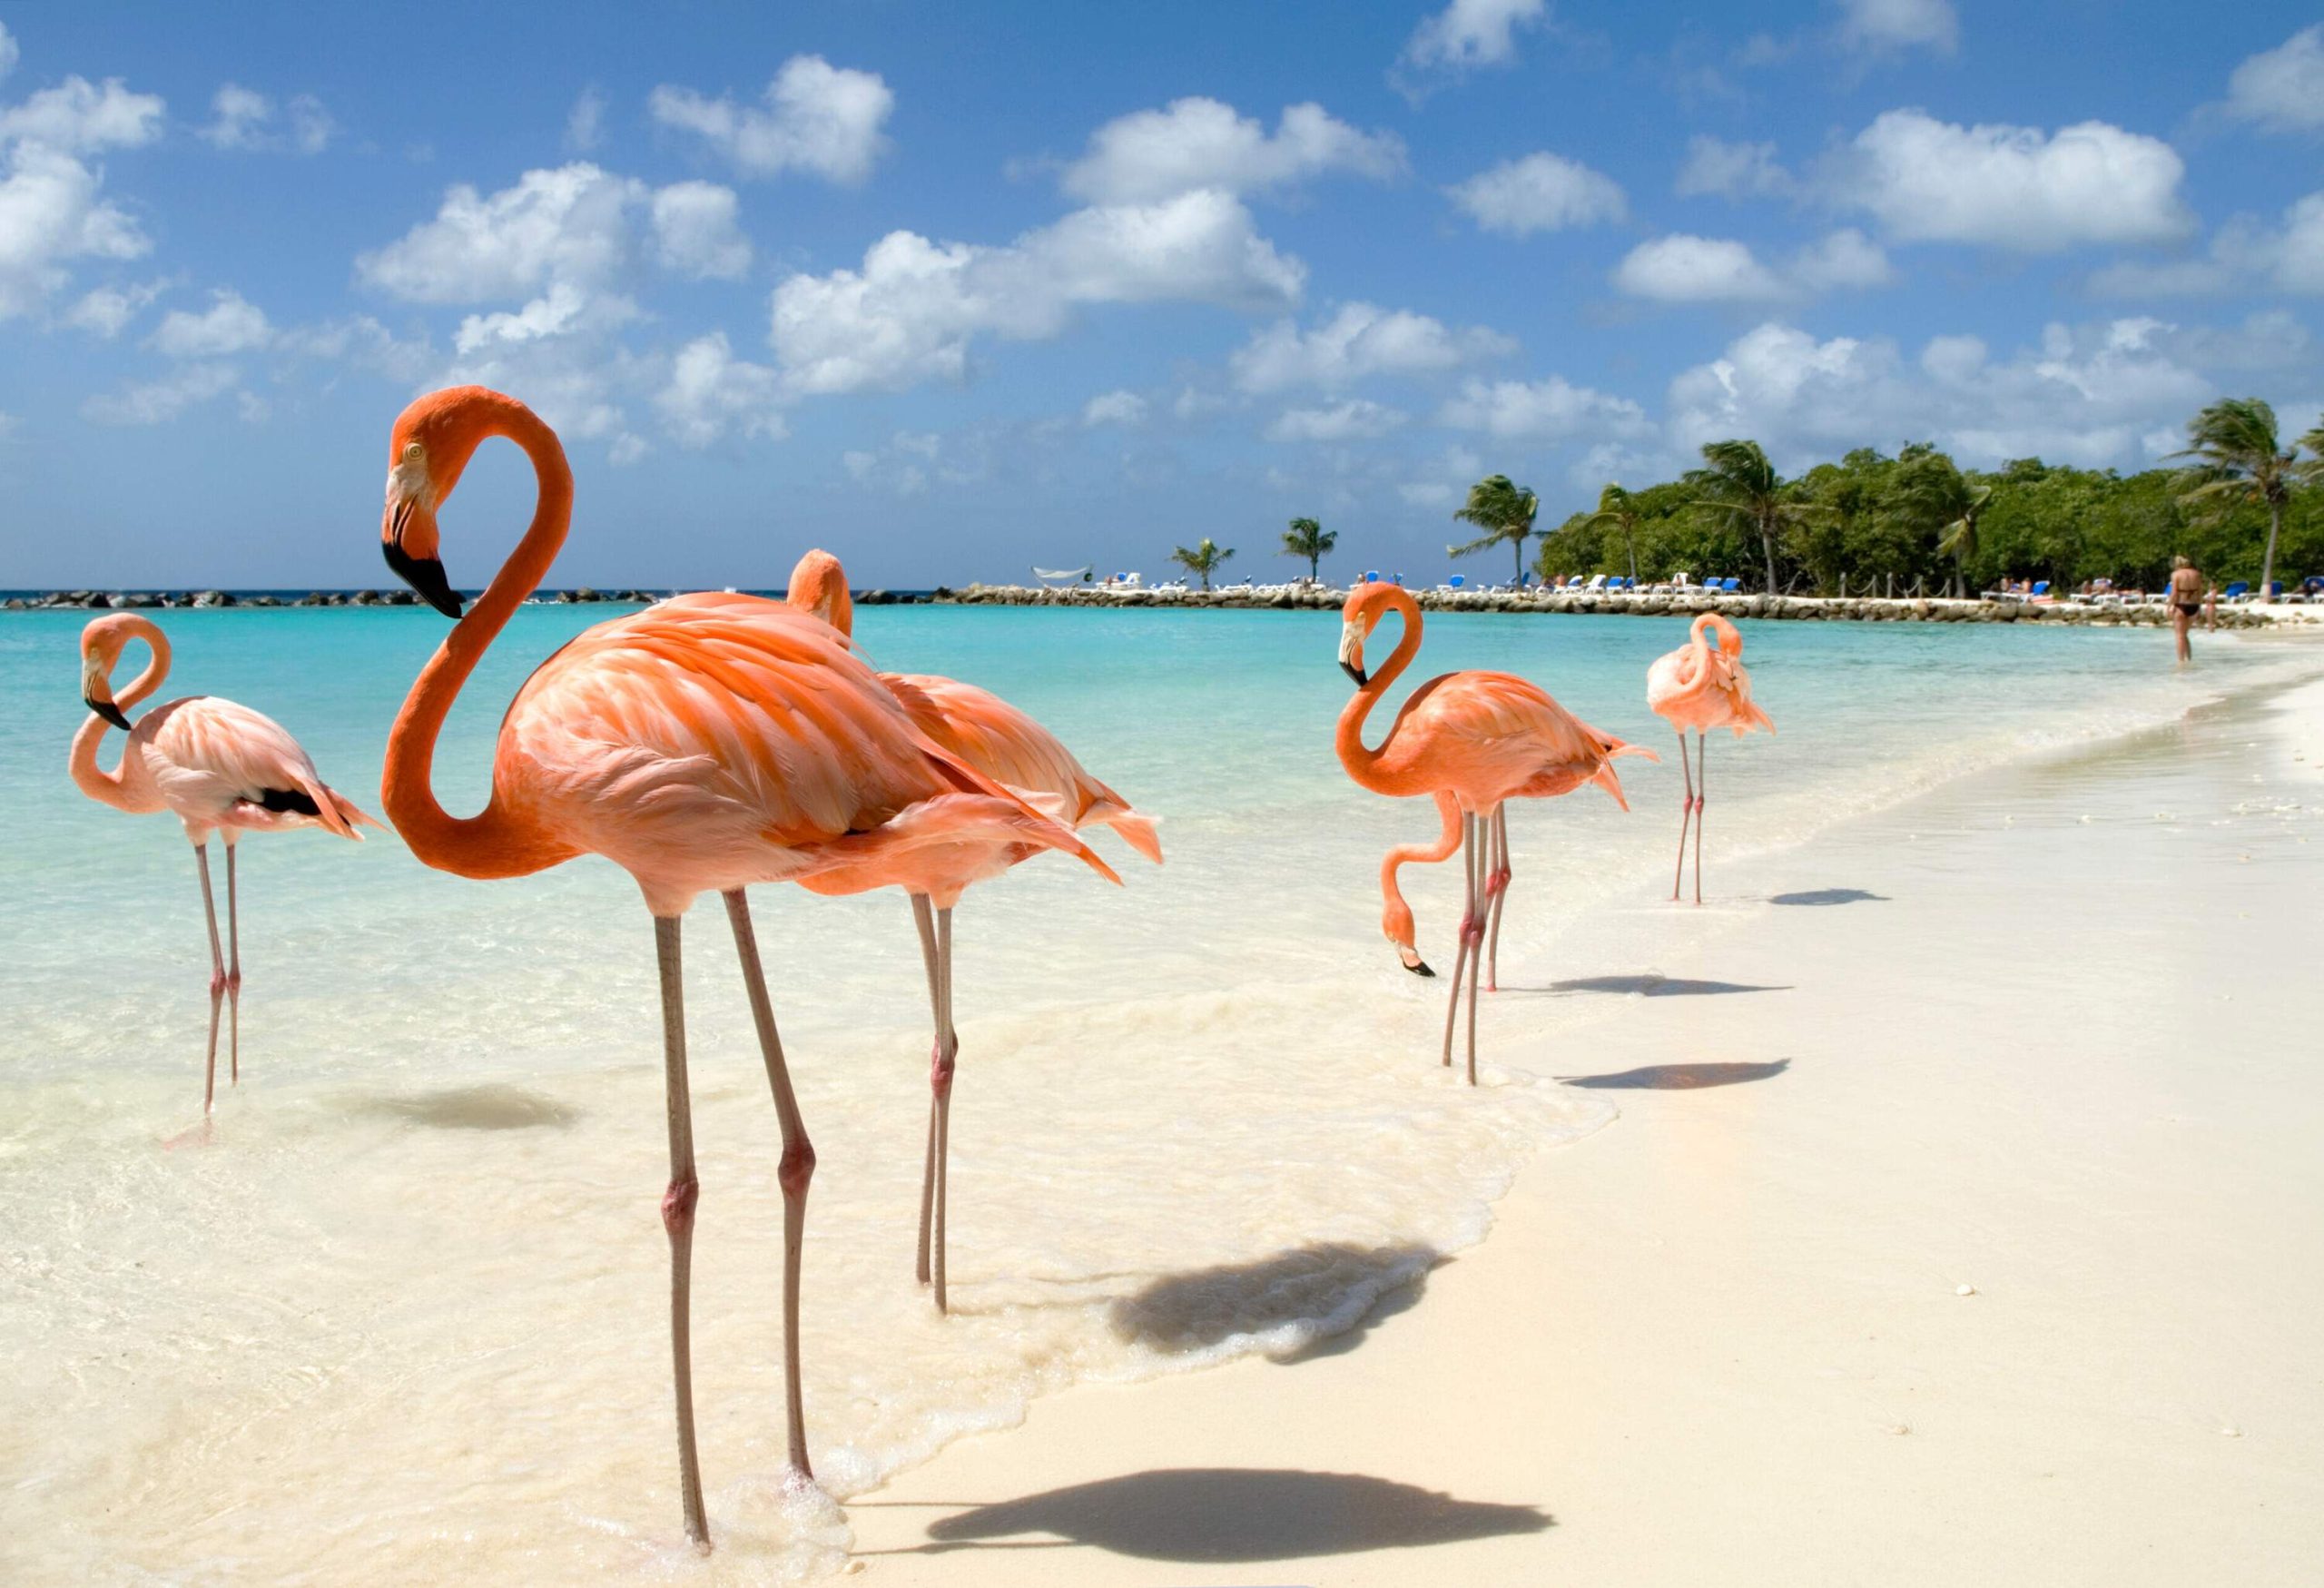 A flock of white and pink feathered flamingos standing on a white beach.